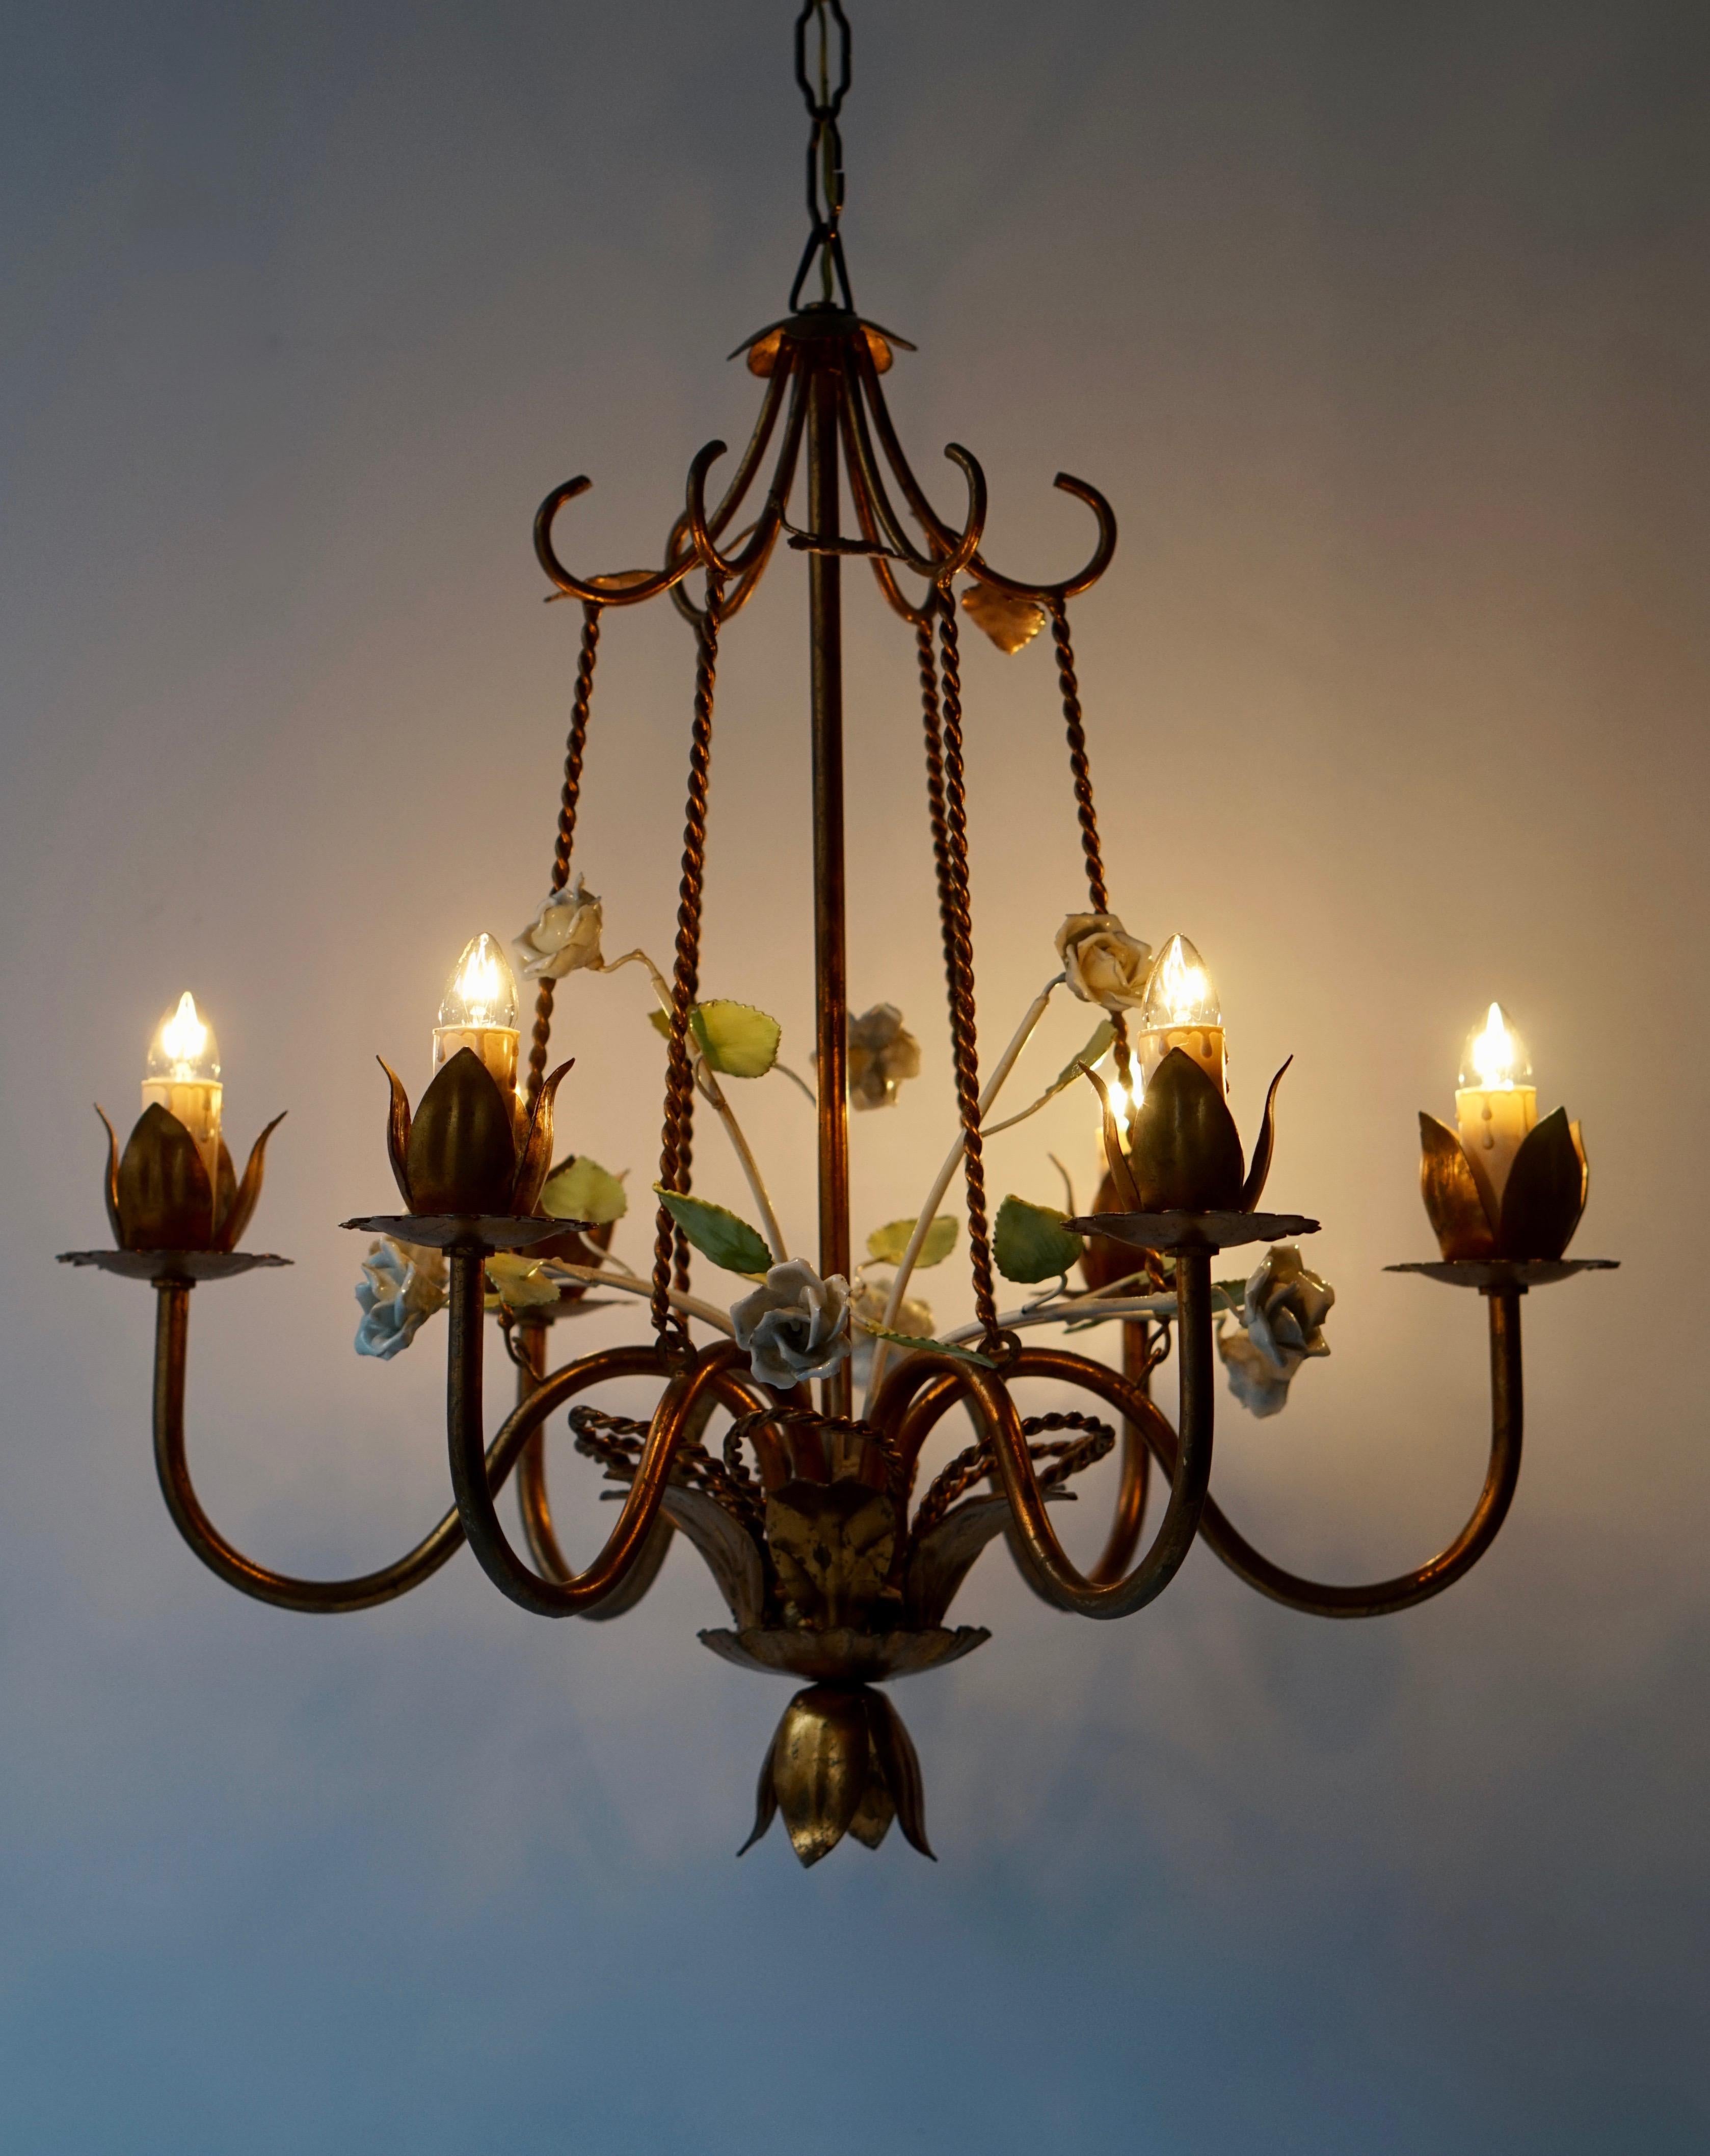 Brass white flower chandelier with six arms.

Diameter 50 cm.
Height fixture 52 cm.
Total height with the chain is 100 cm.